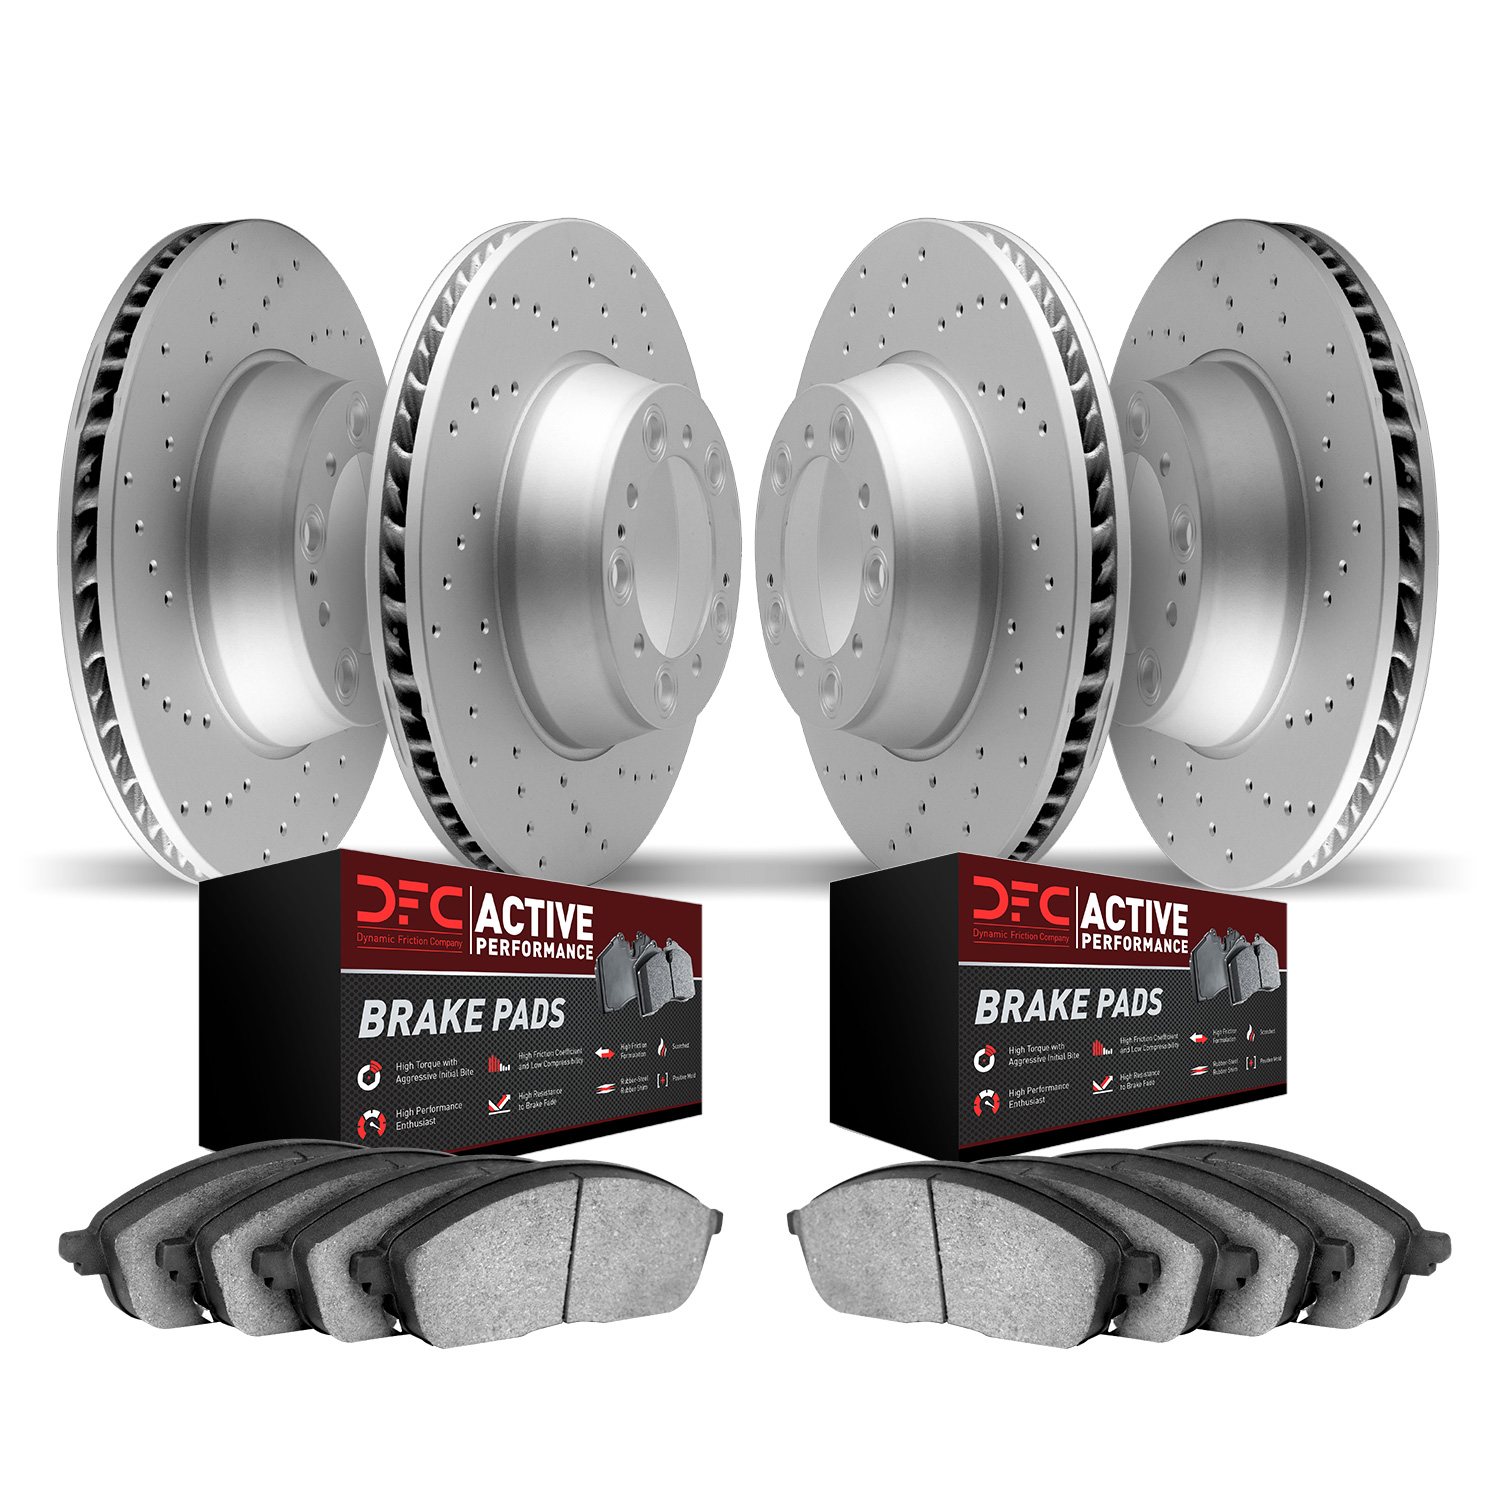 2704-74034 Geoperformance Drilled Brake Rotors with Active Performance Pads Kit, 2011-2014 Porsche, Position: Front and Rear